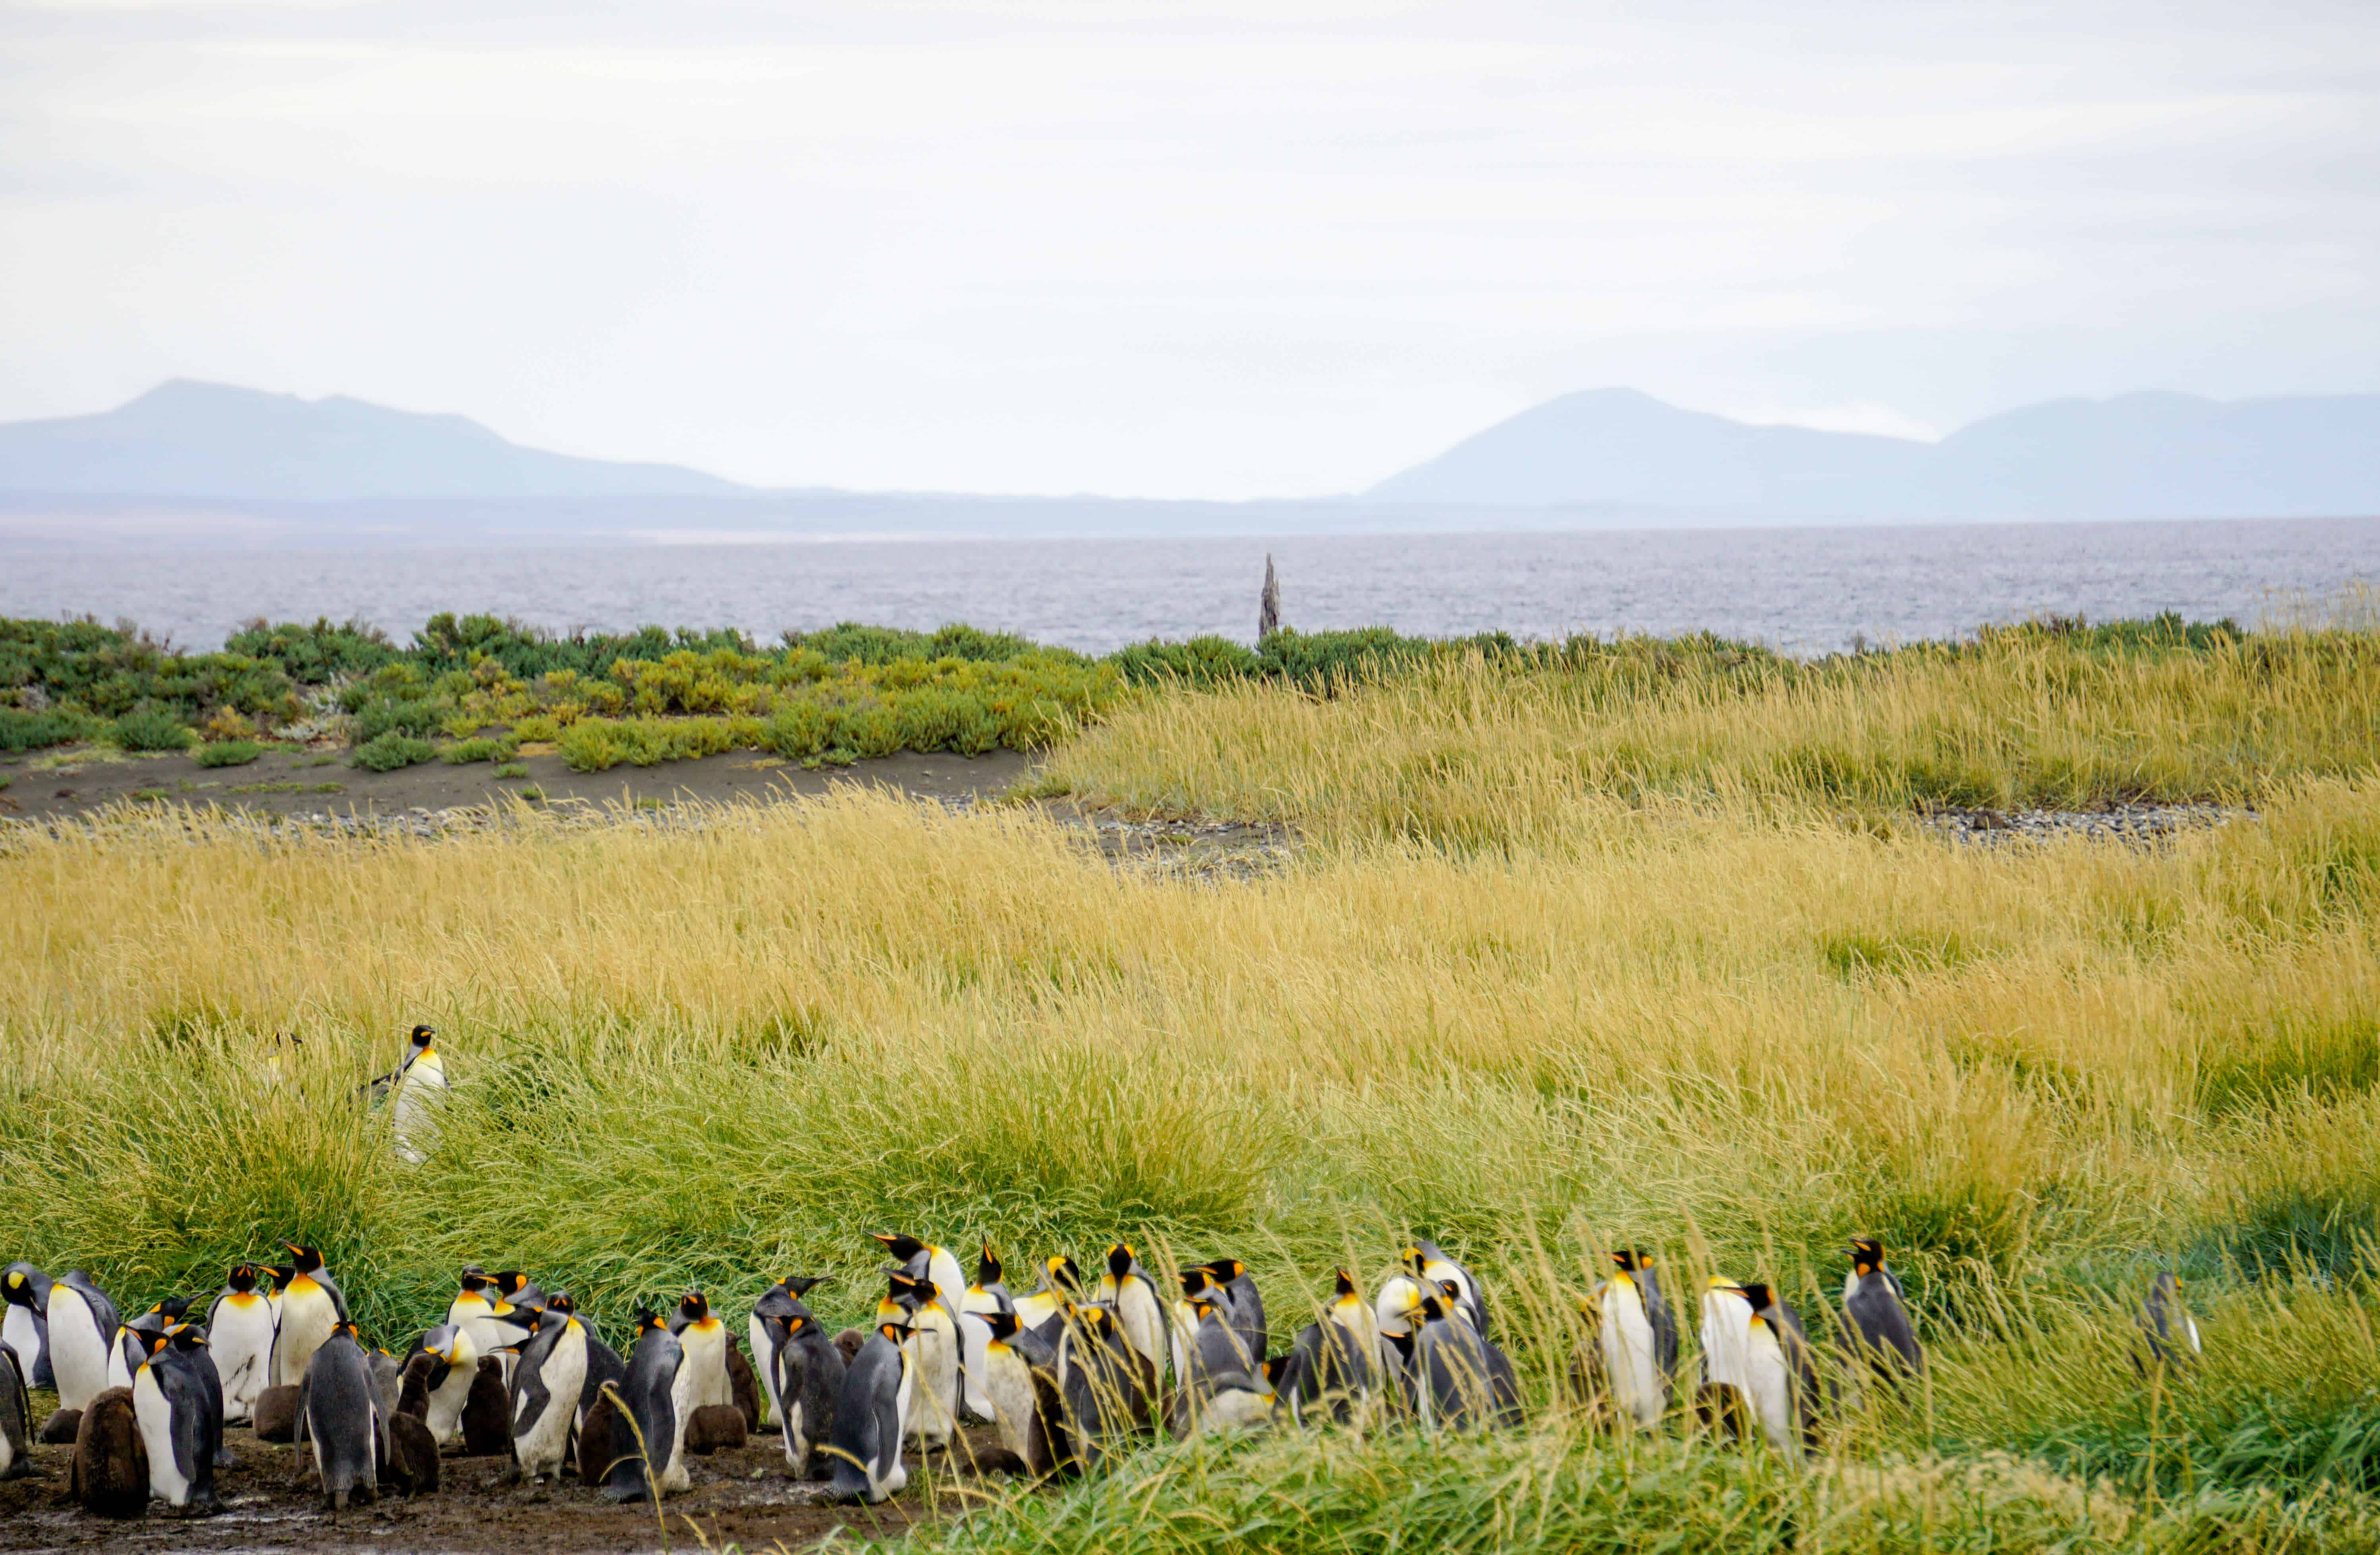 King Penguin Colony of Punto Arenas